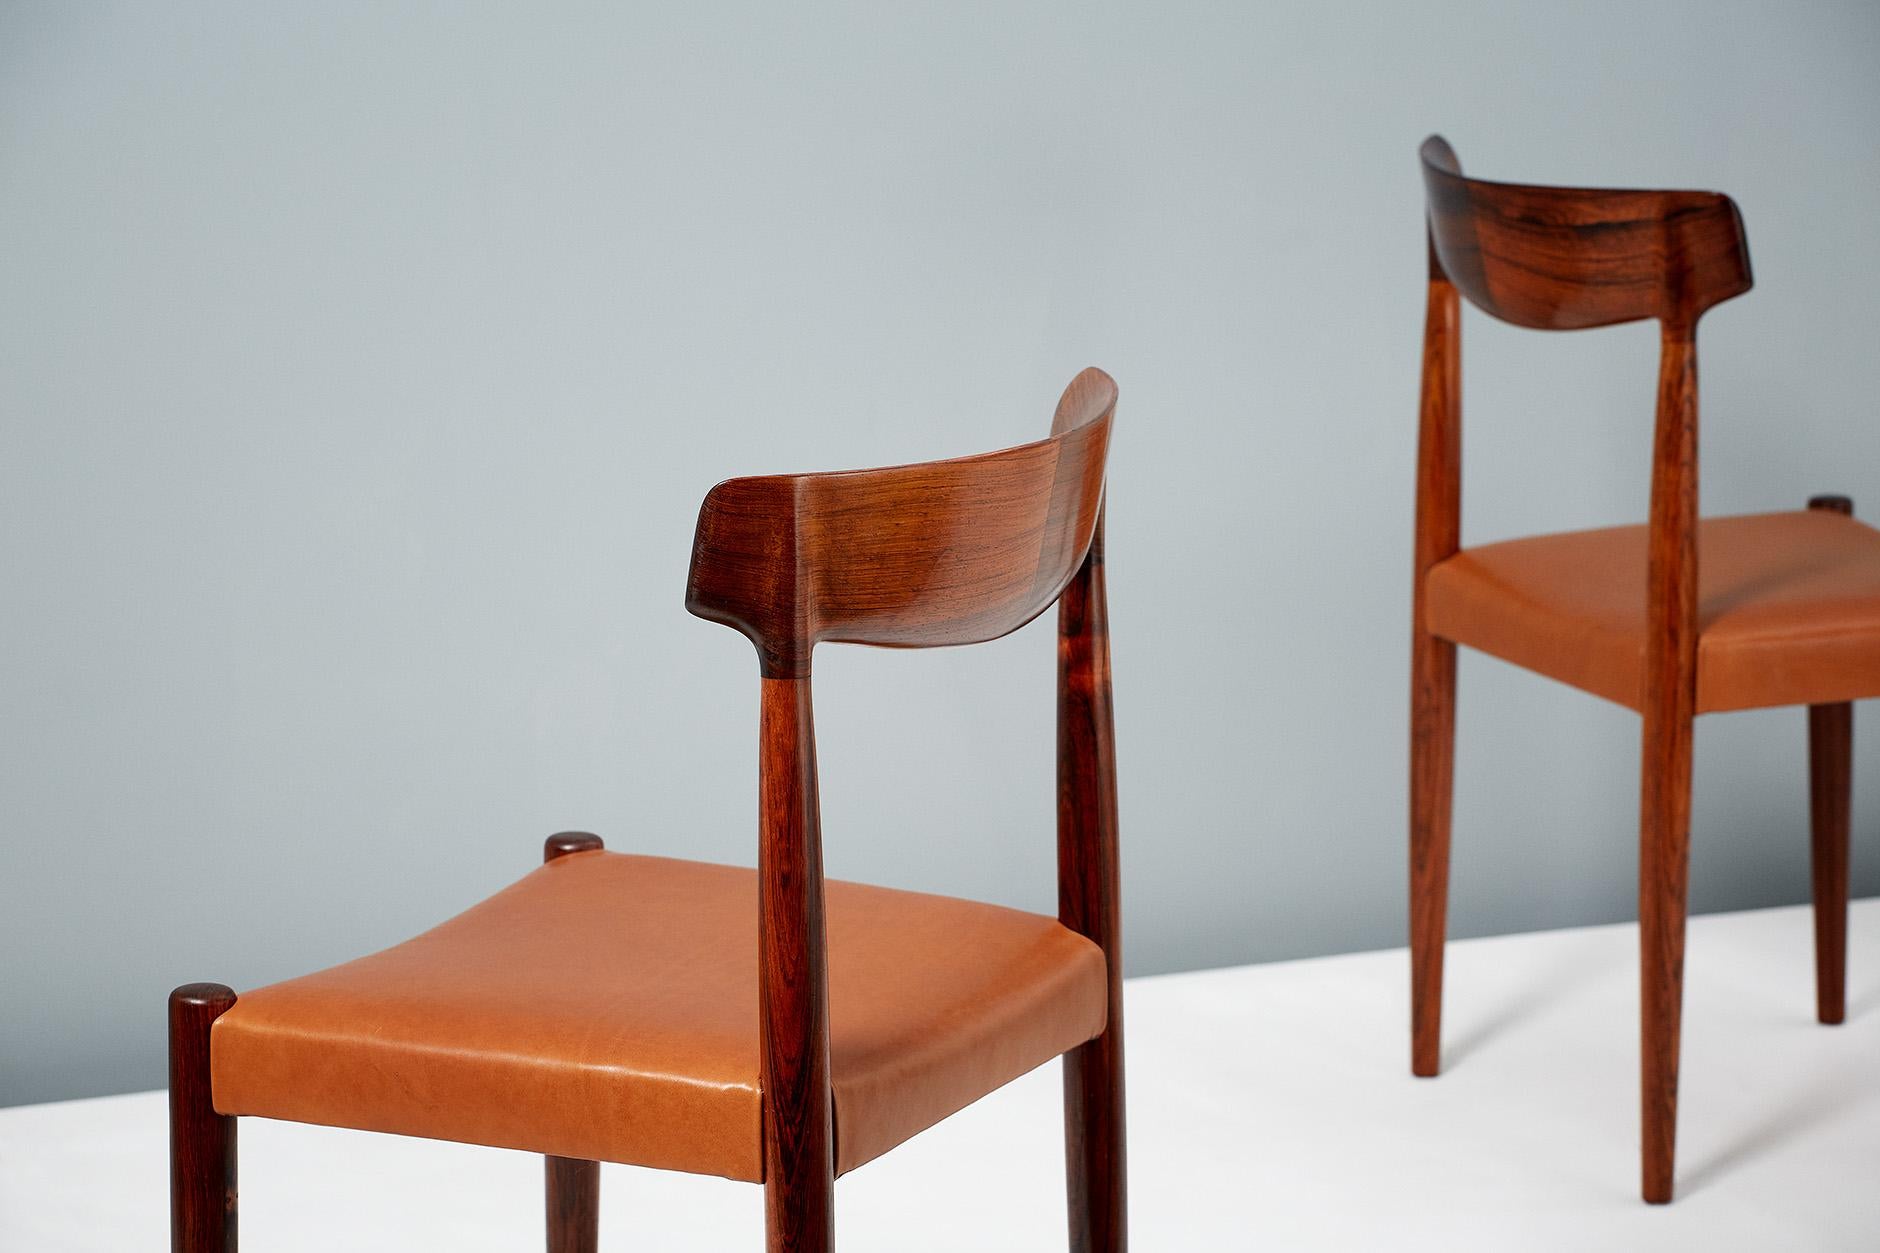 Scandinavian Modern Knud Faerch Set of 8 Model 343 Dining Chairs, Rosewood and Leather